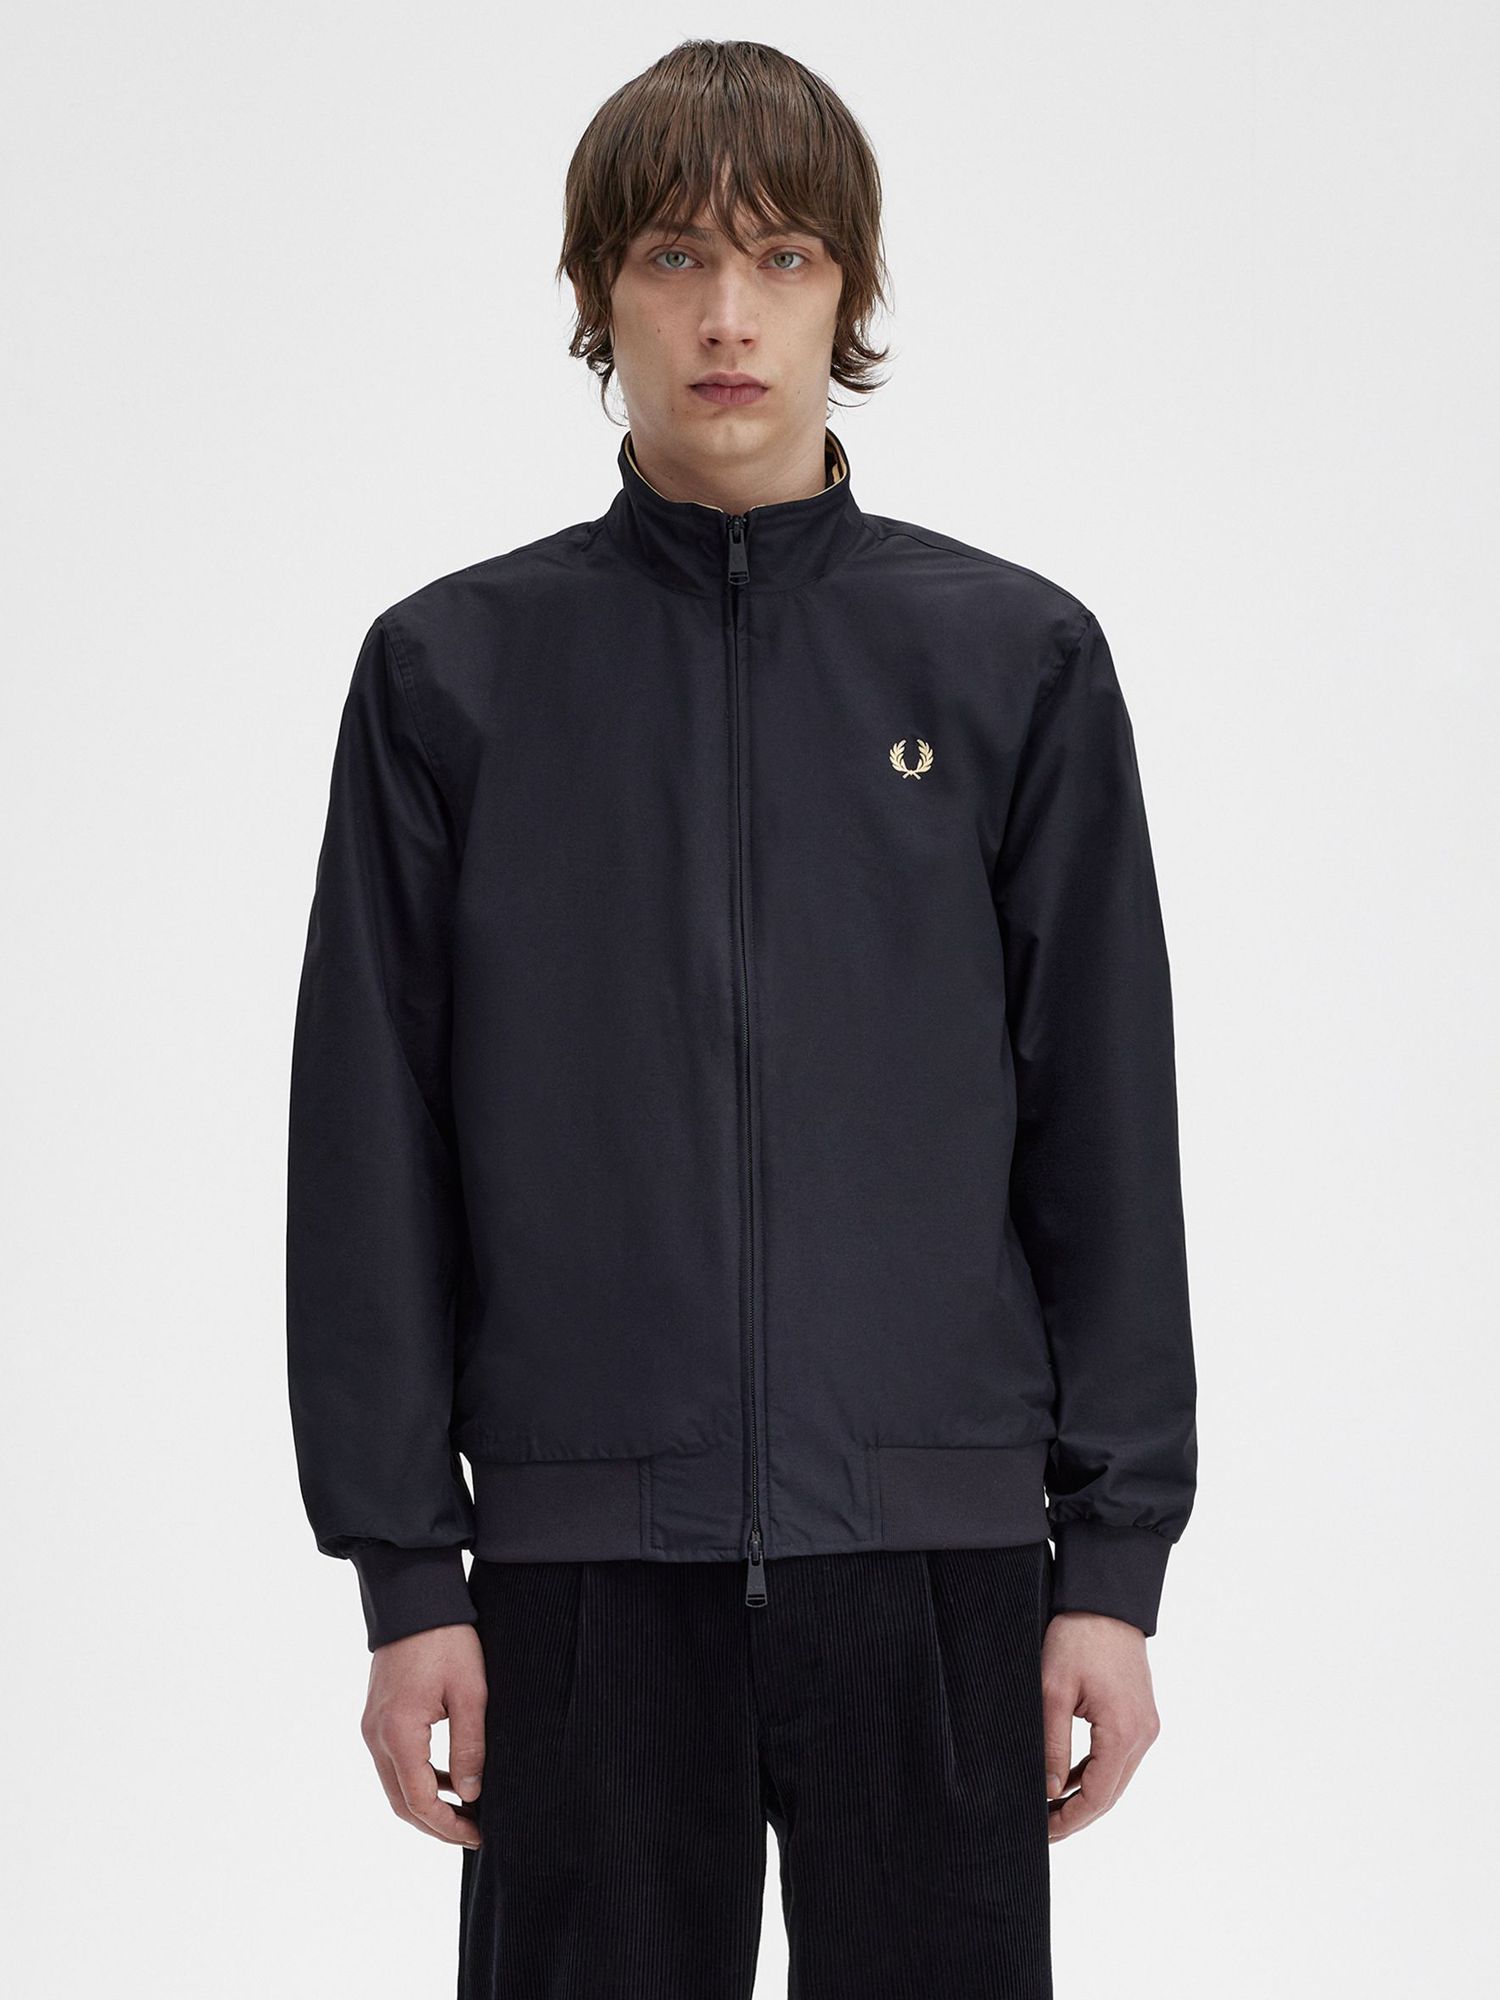 Fred Perry Brentham Jacket, Black, S